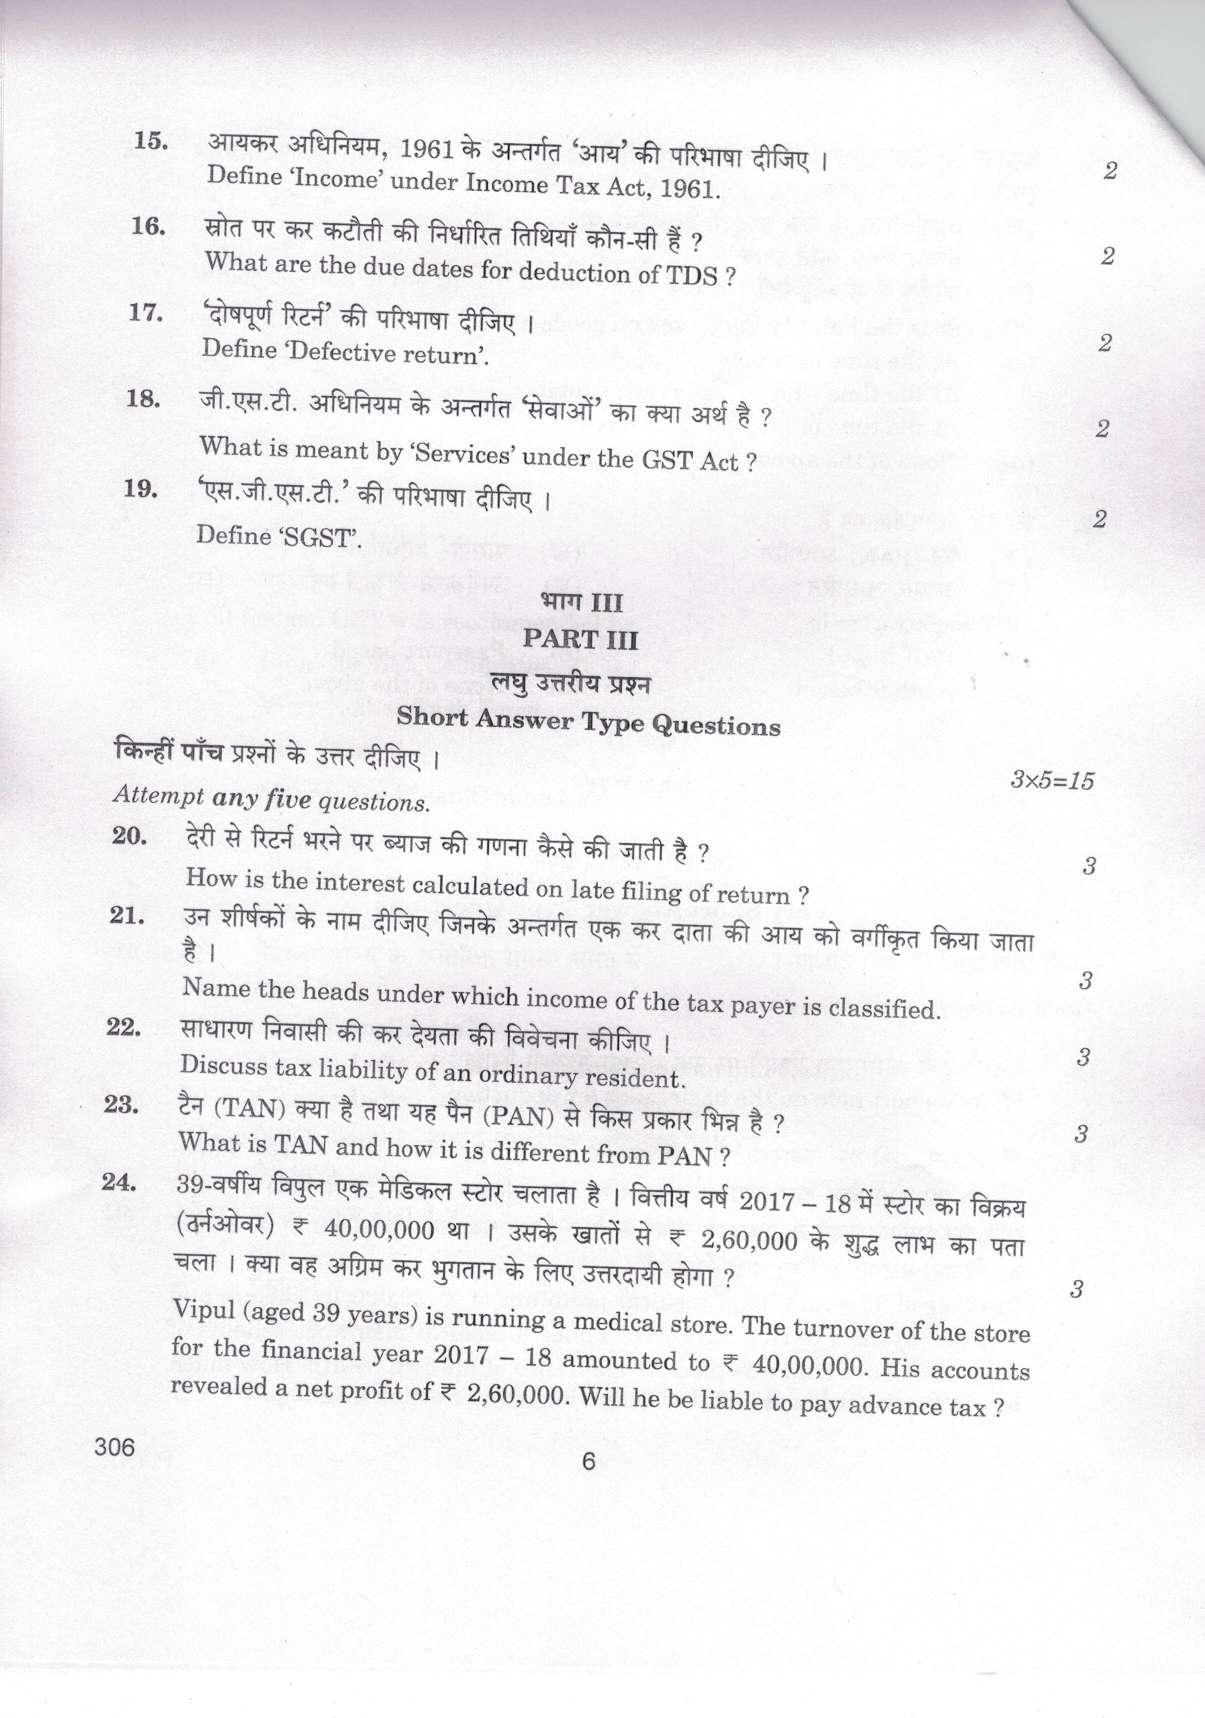 CBSE Class 12 306 Taxation_compressed 2019 Question Paper - Page 6